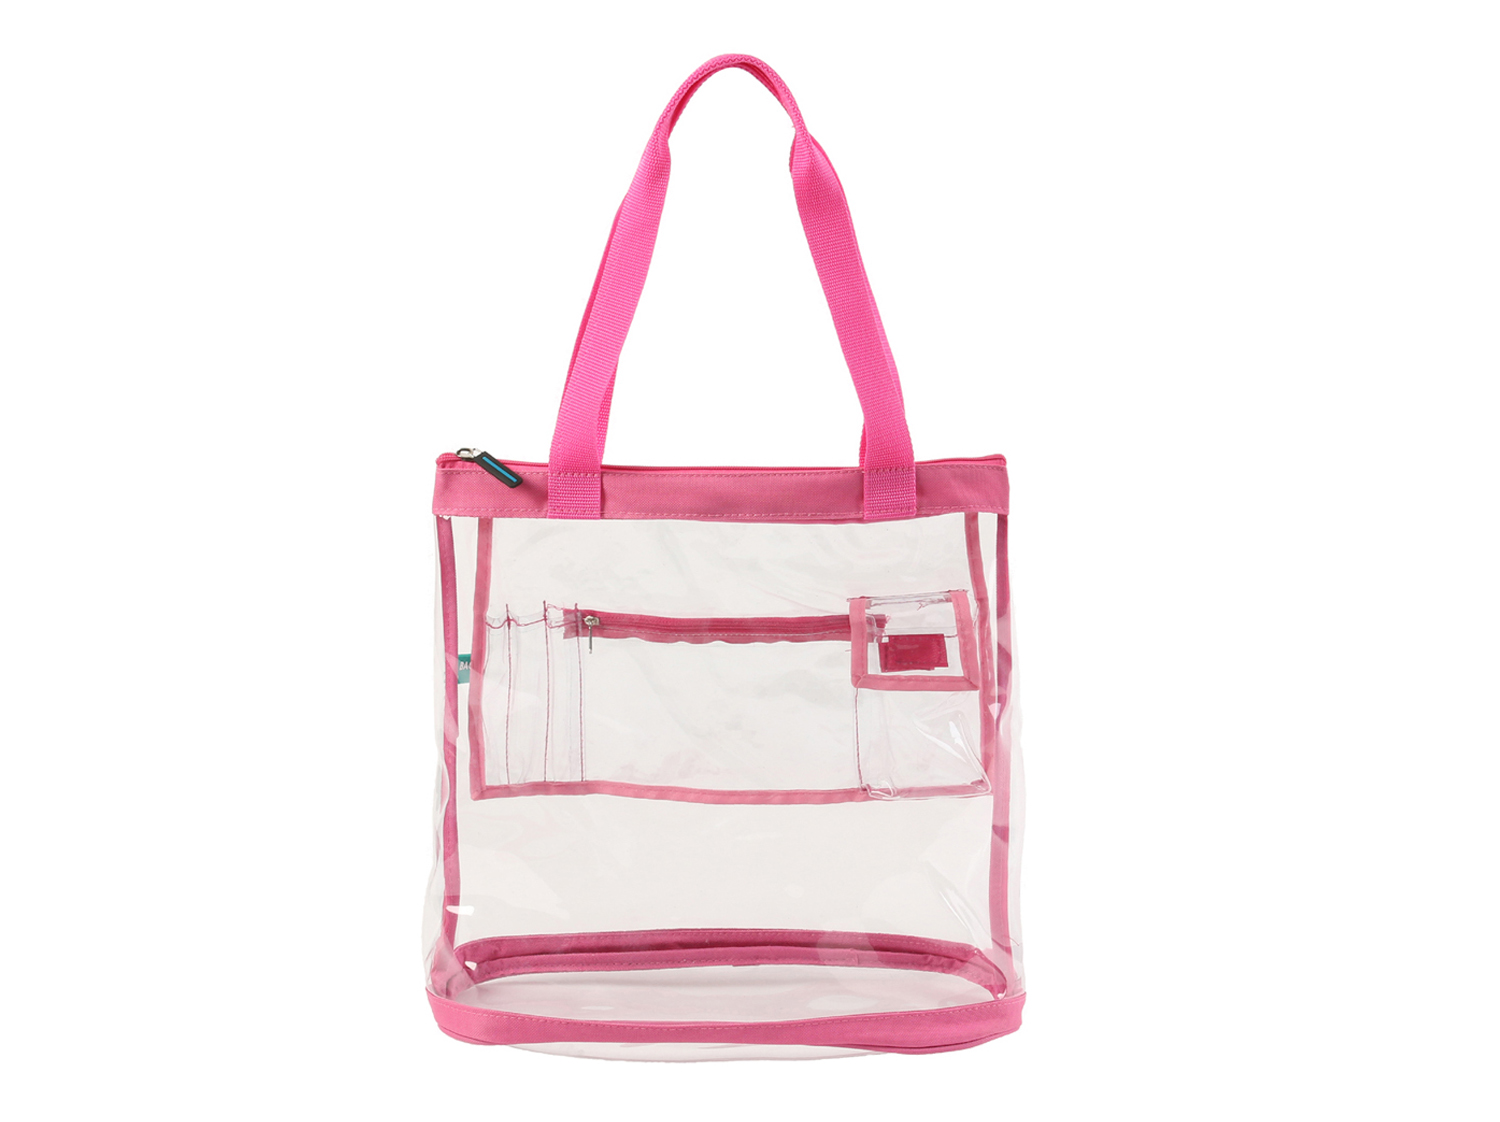 Clear Plastic Bag - Small Pink Tote - The Clear Bag Store